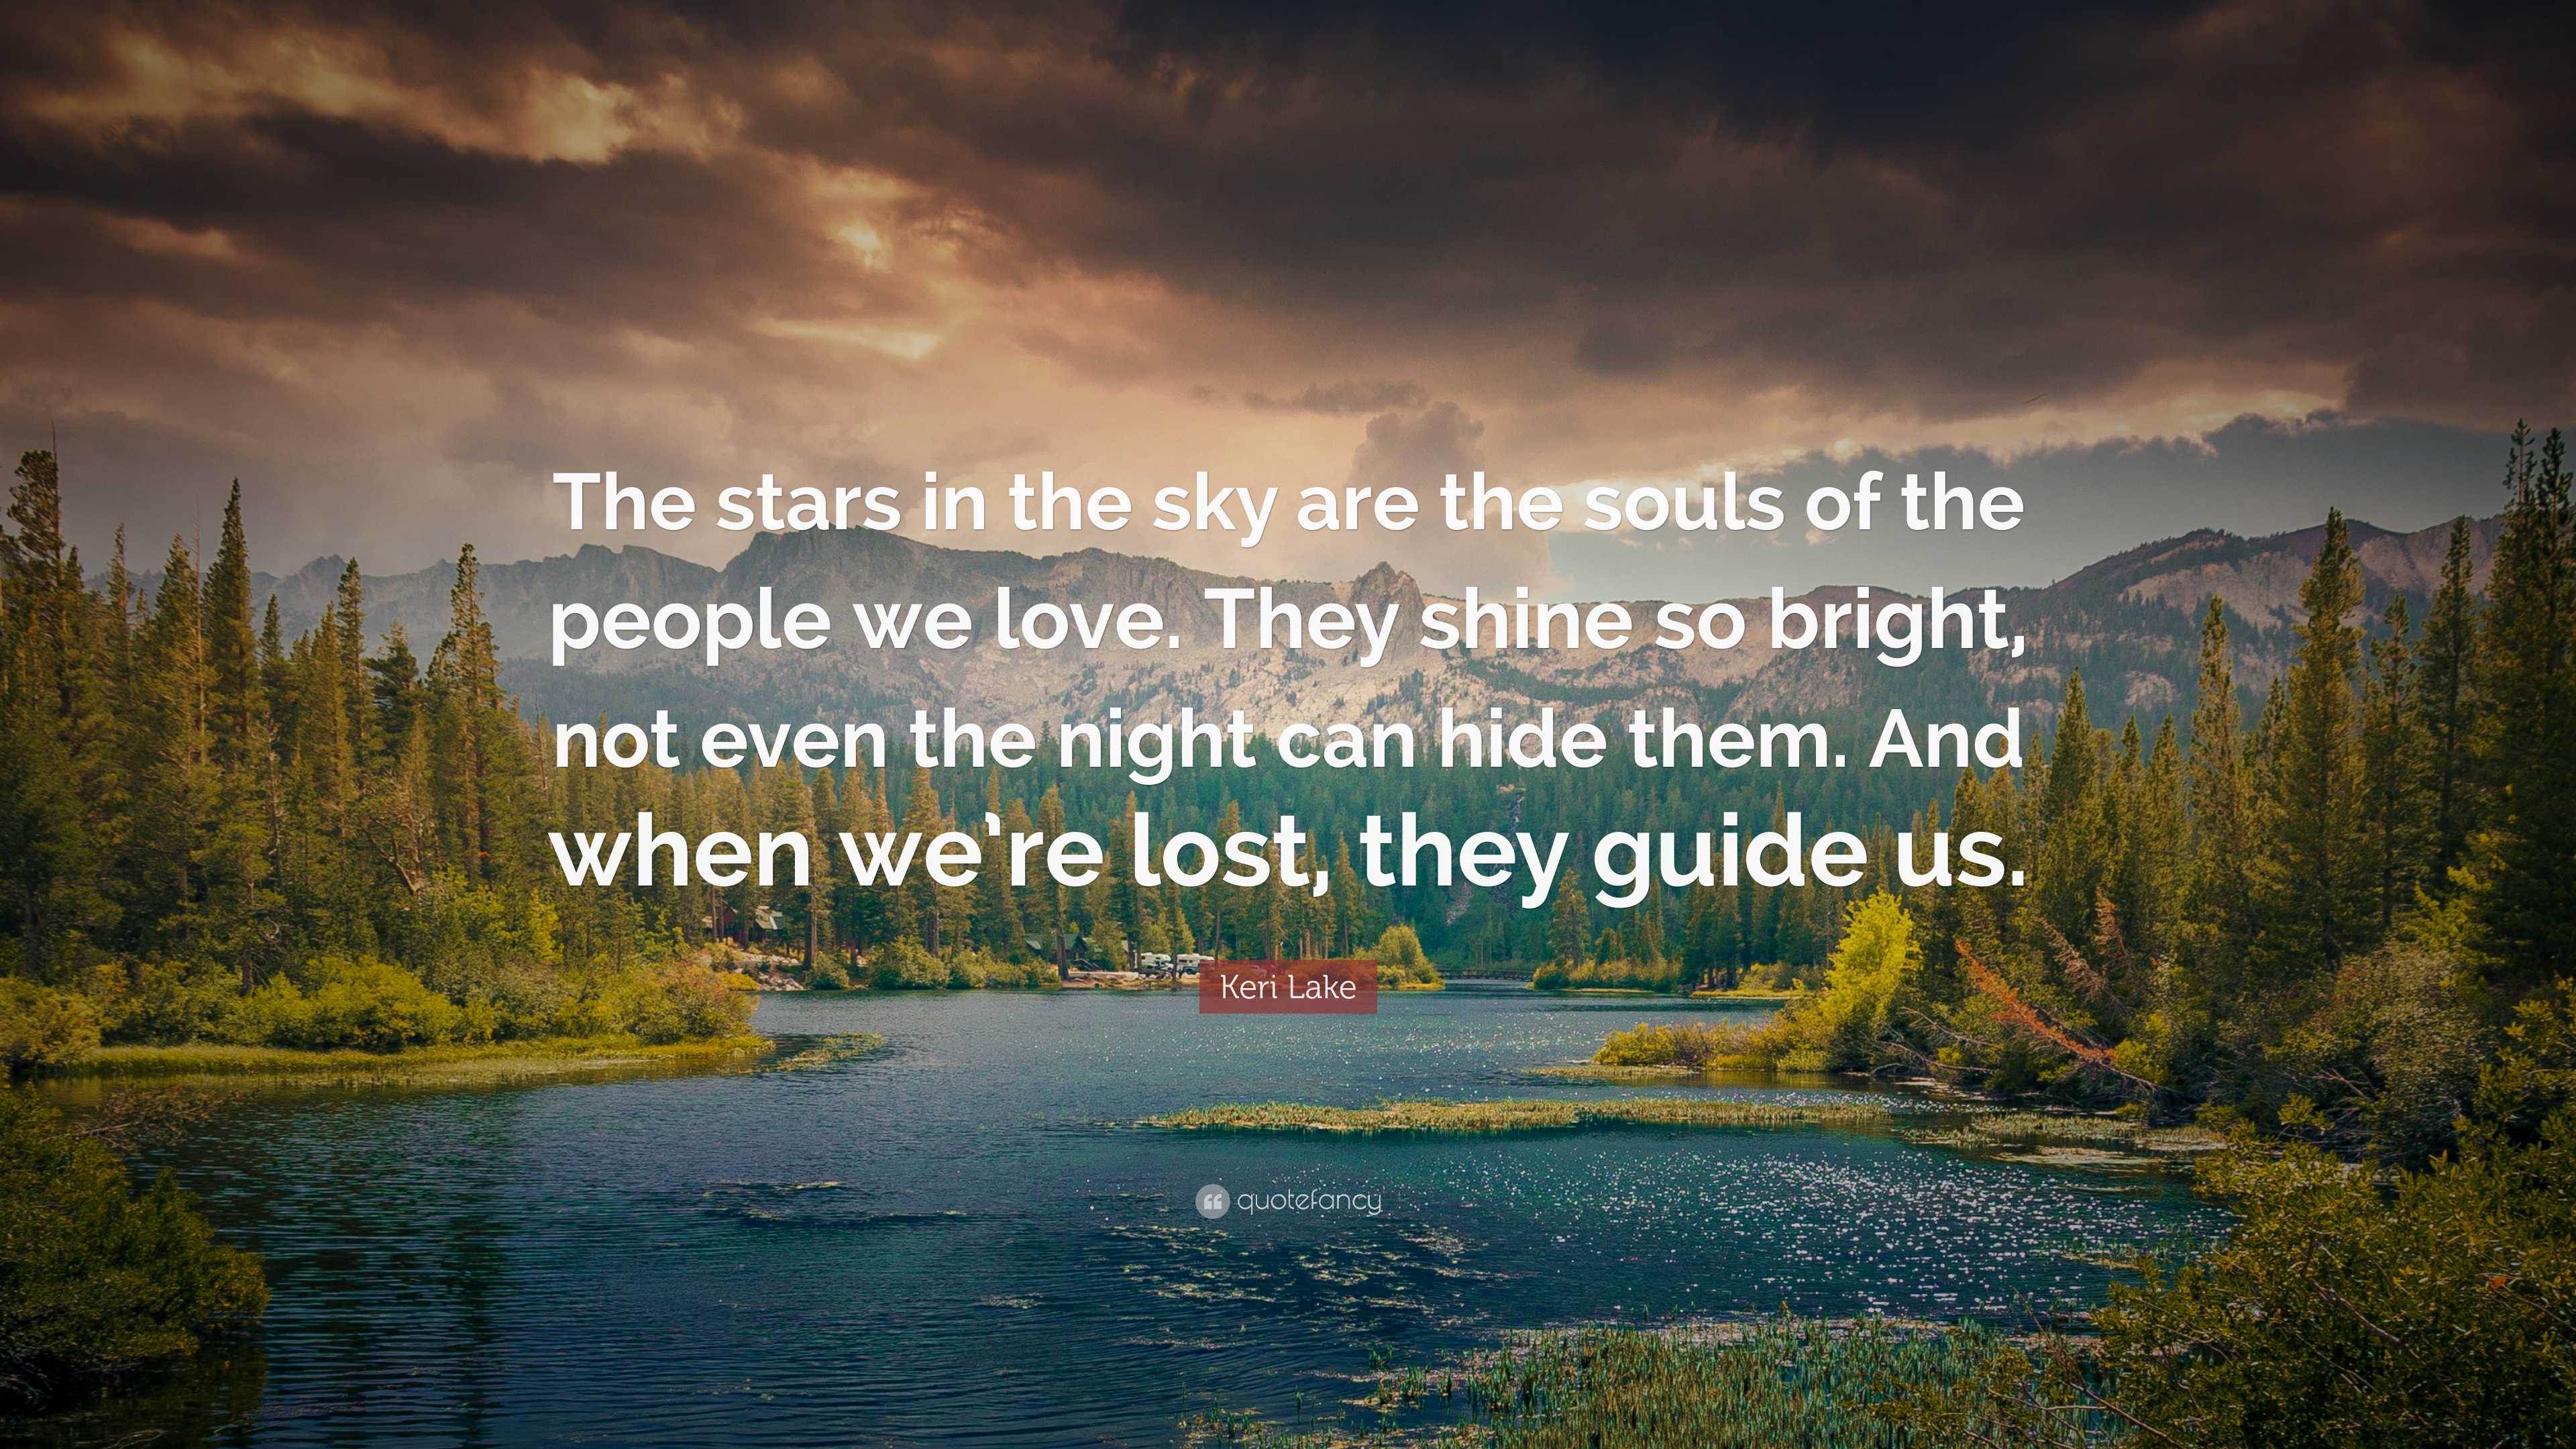 https://quotefancy.com/media/wallpaper/3840x2160/7791926-Keri-Lake-Quote-The-stars-in-the-sky-are-the-souls-of-the-people.jpg